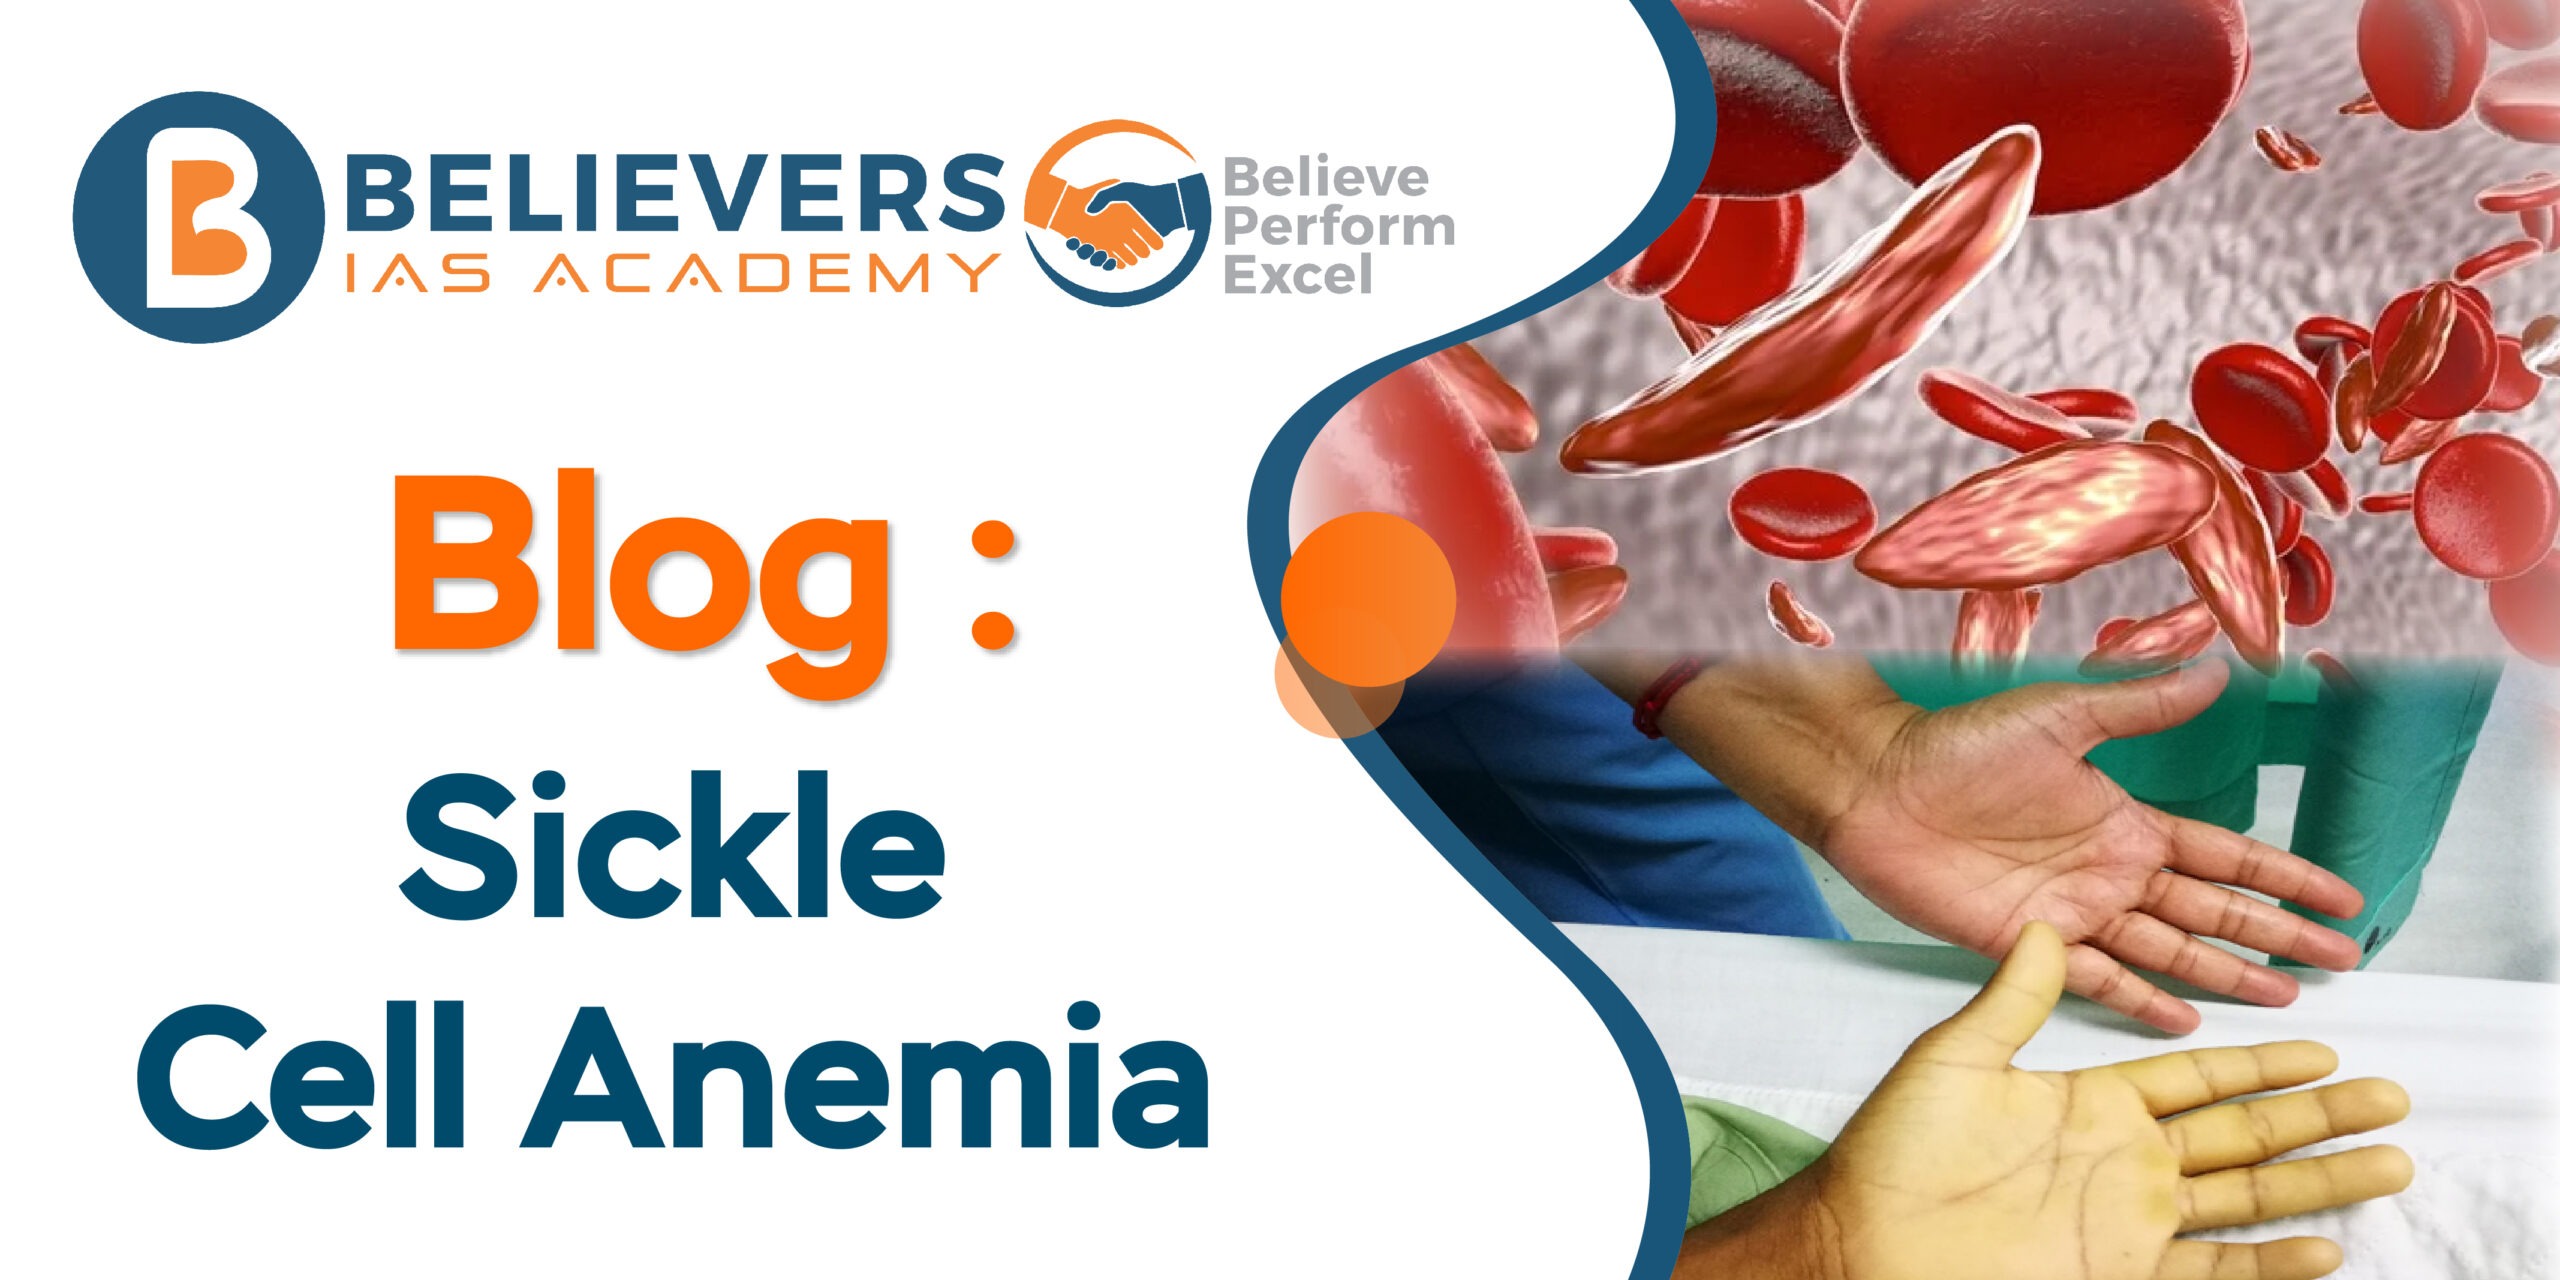 Blog: Sickle Cell